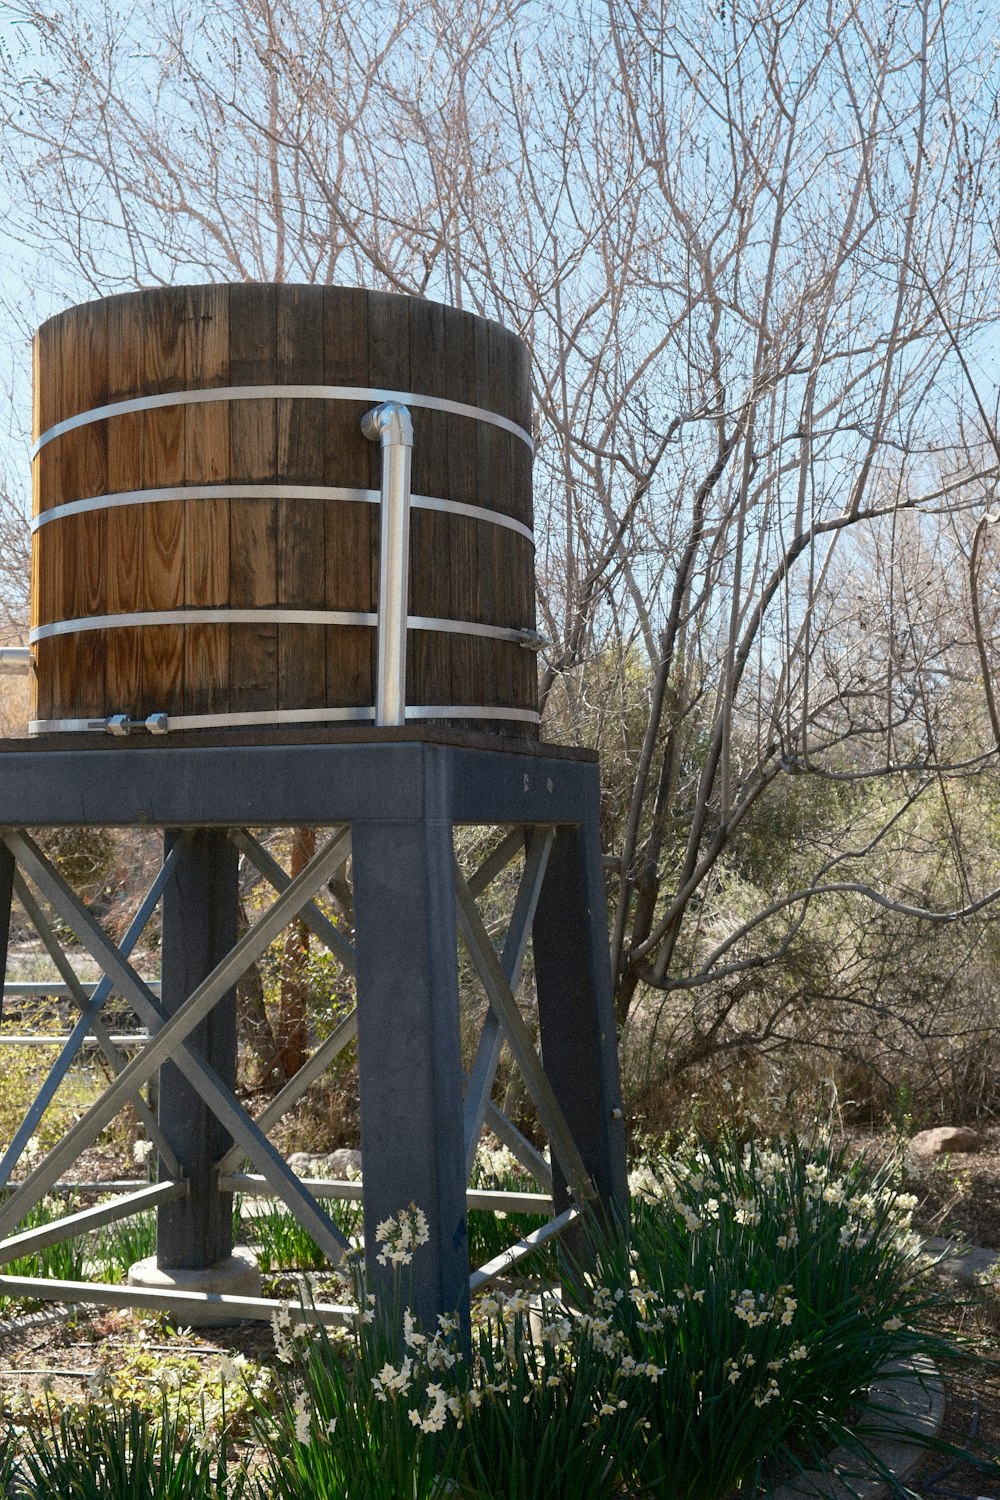 a large wooden barrel sitting on top of a metal stand